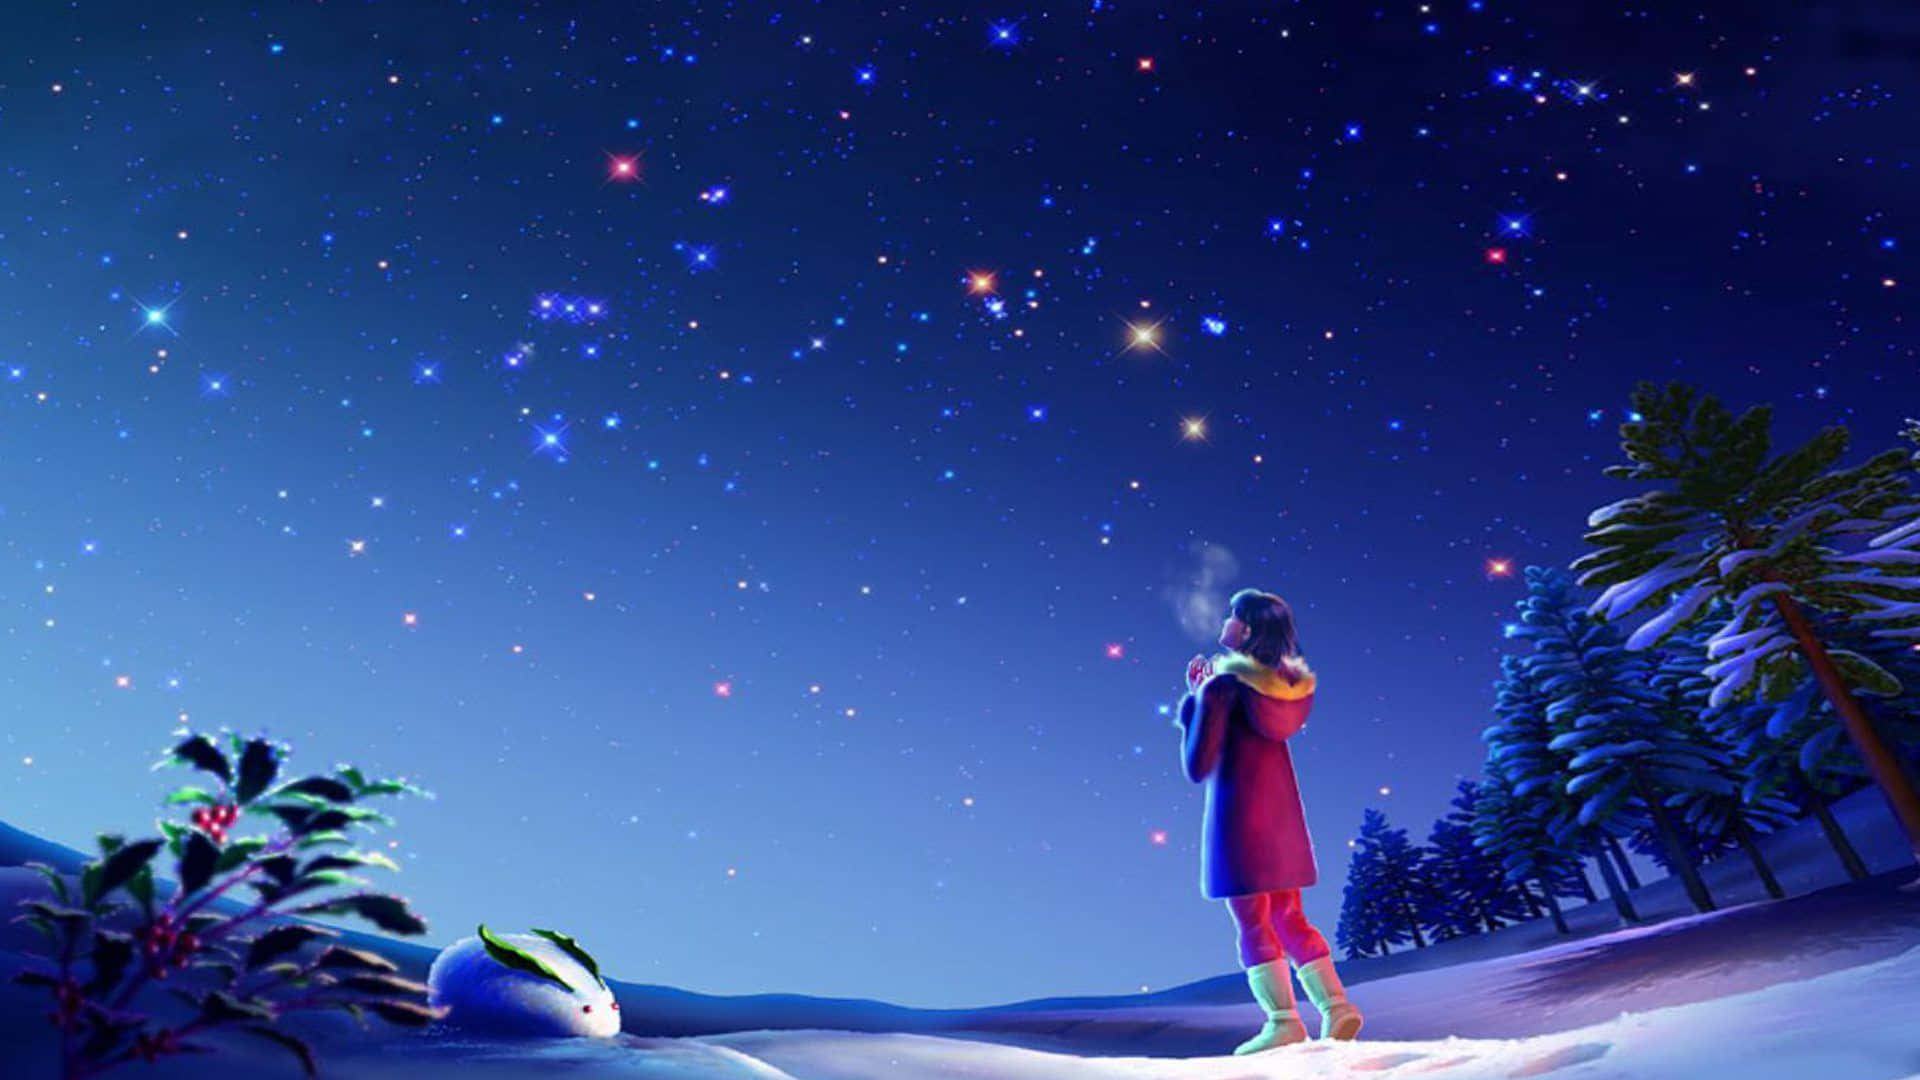 Magical Night Sky With Girl Looking At Sky